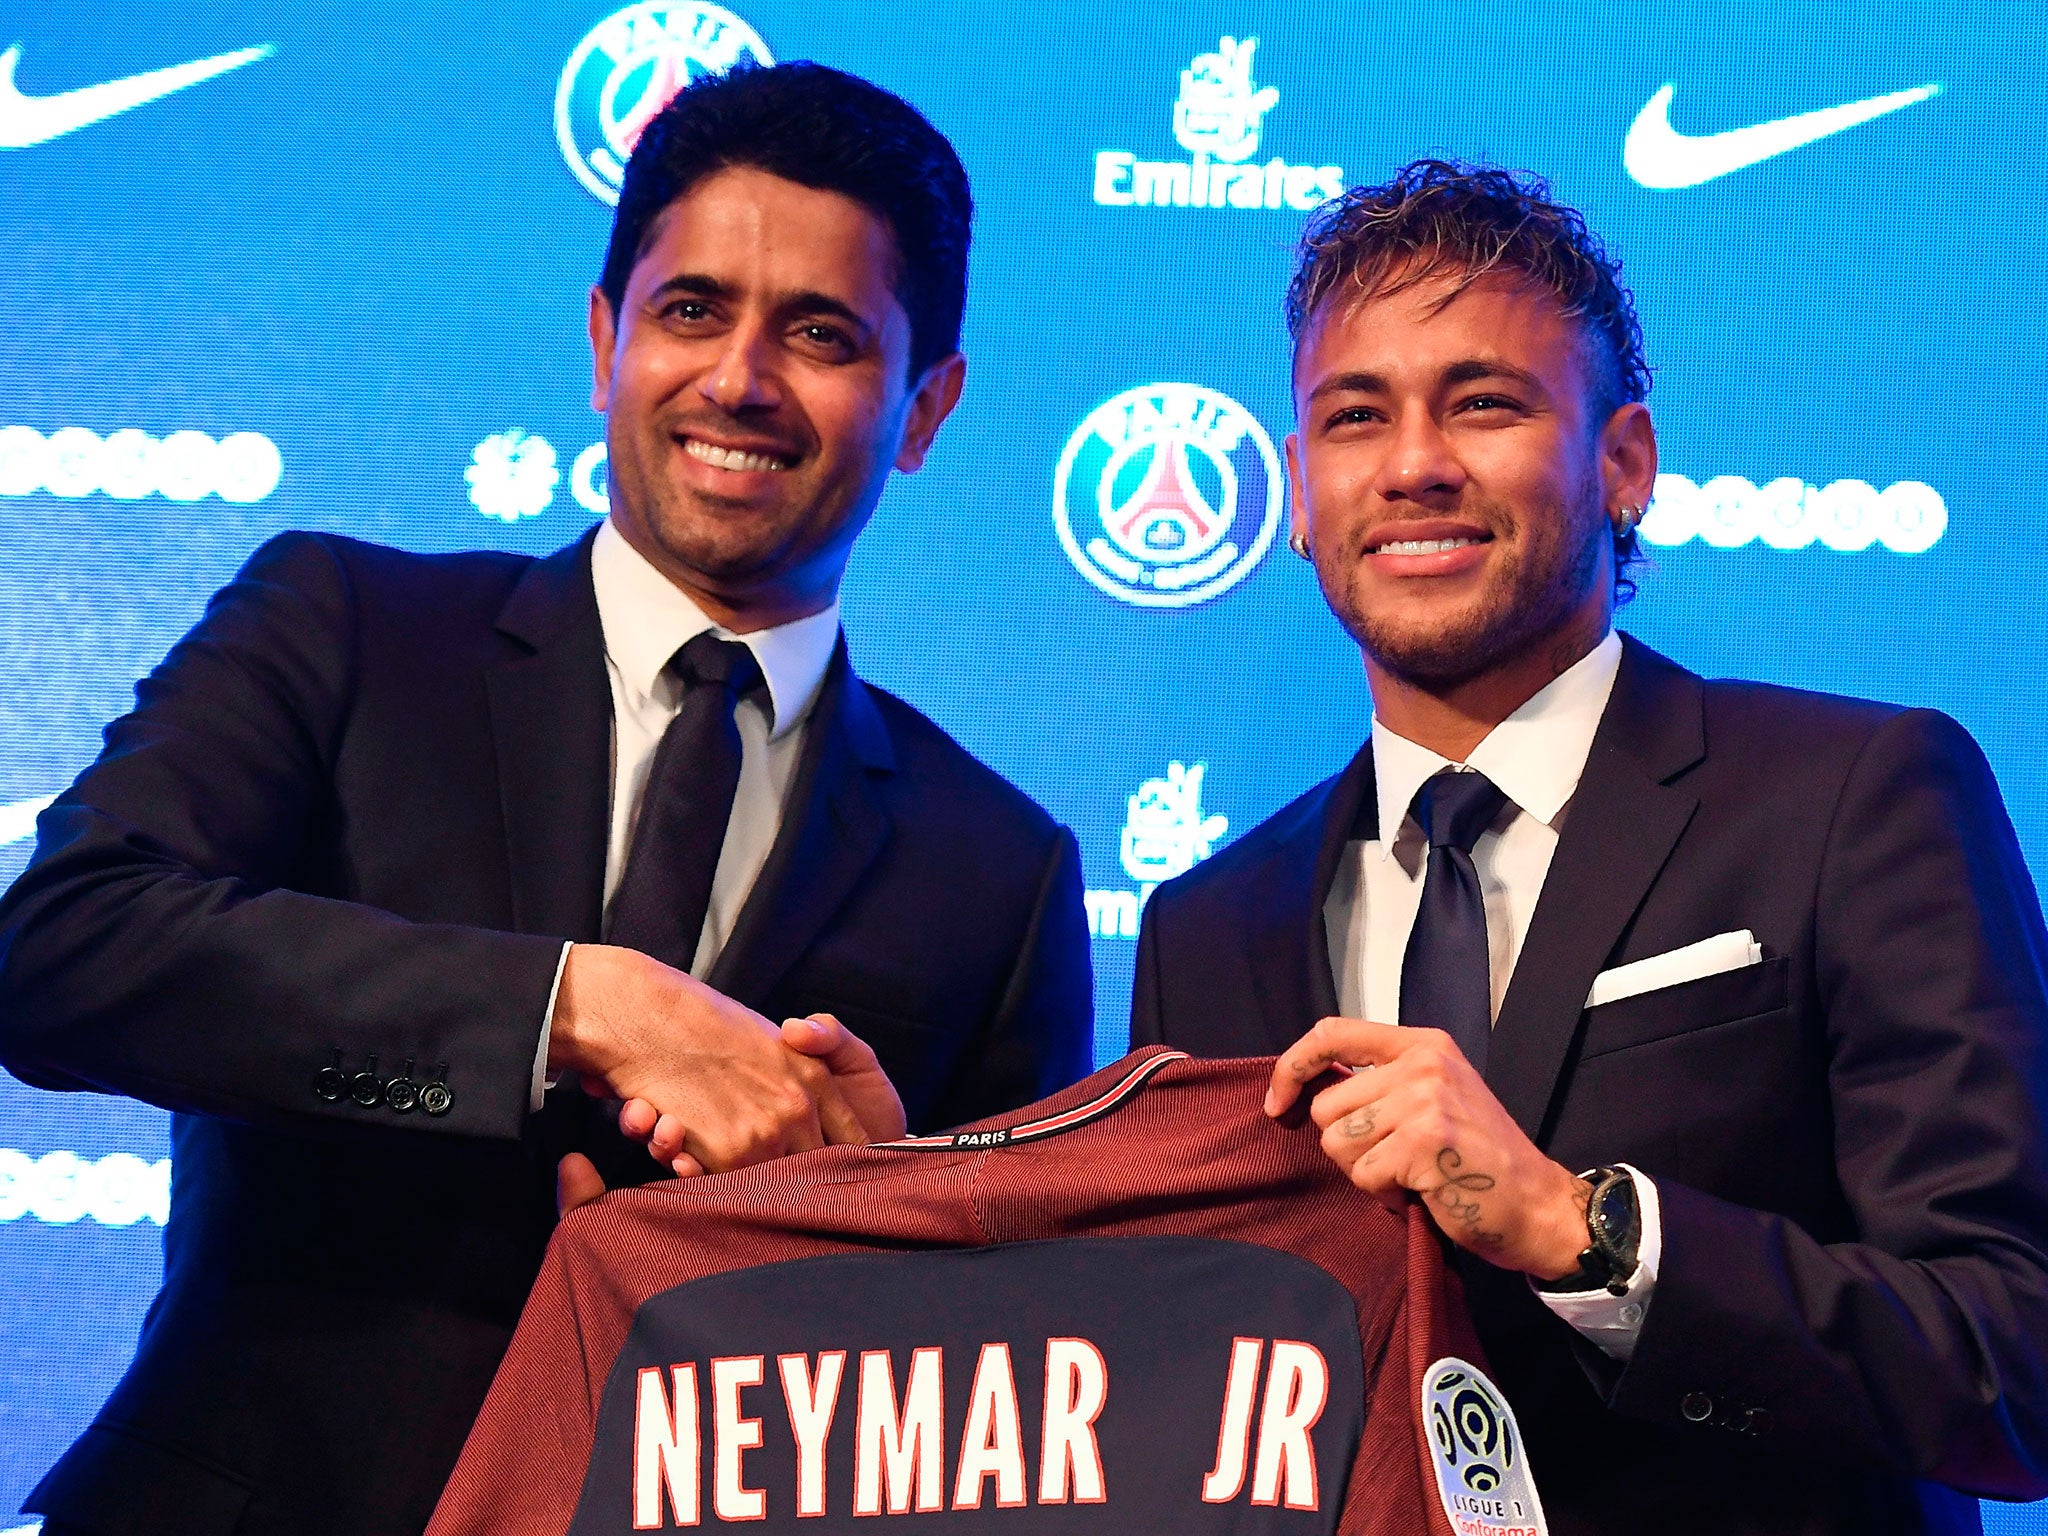 Neymar's move has sparked a transfer trail across the continent which has ramped up valuations